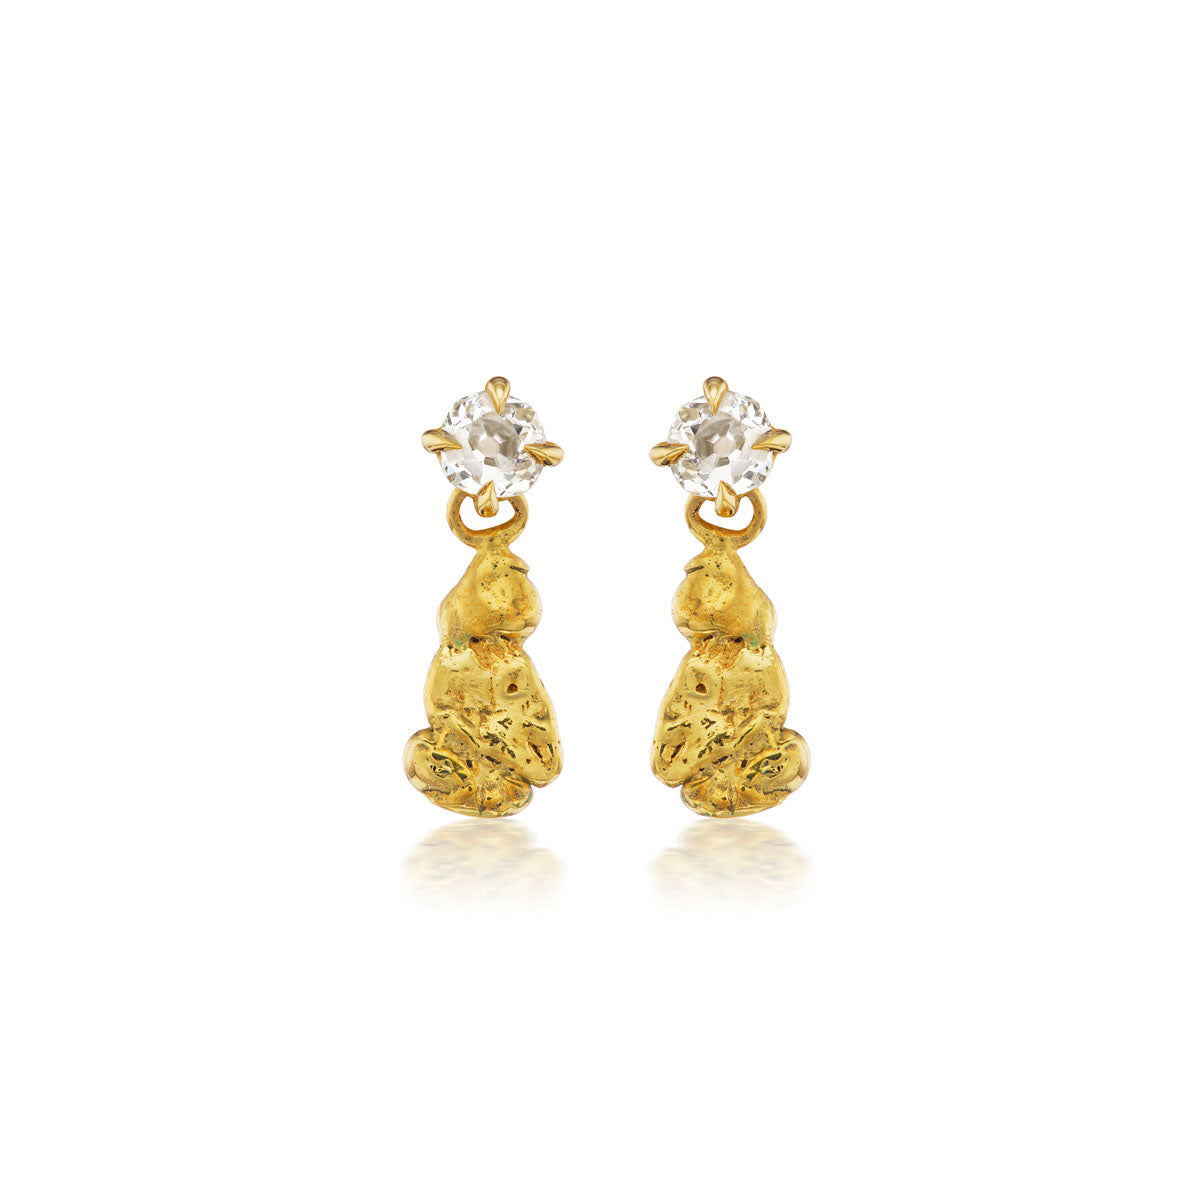 THE GOLD RUSH NUGGET EARRINGS